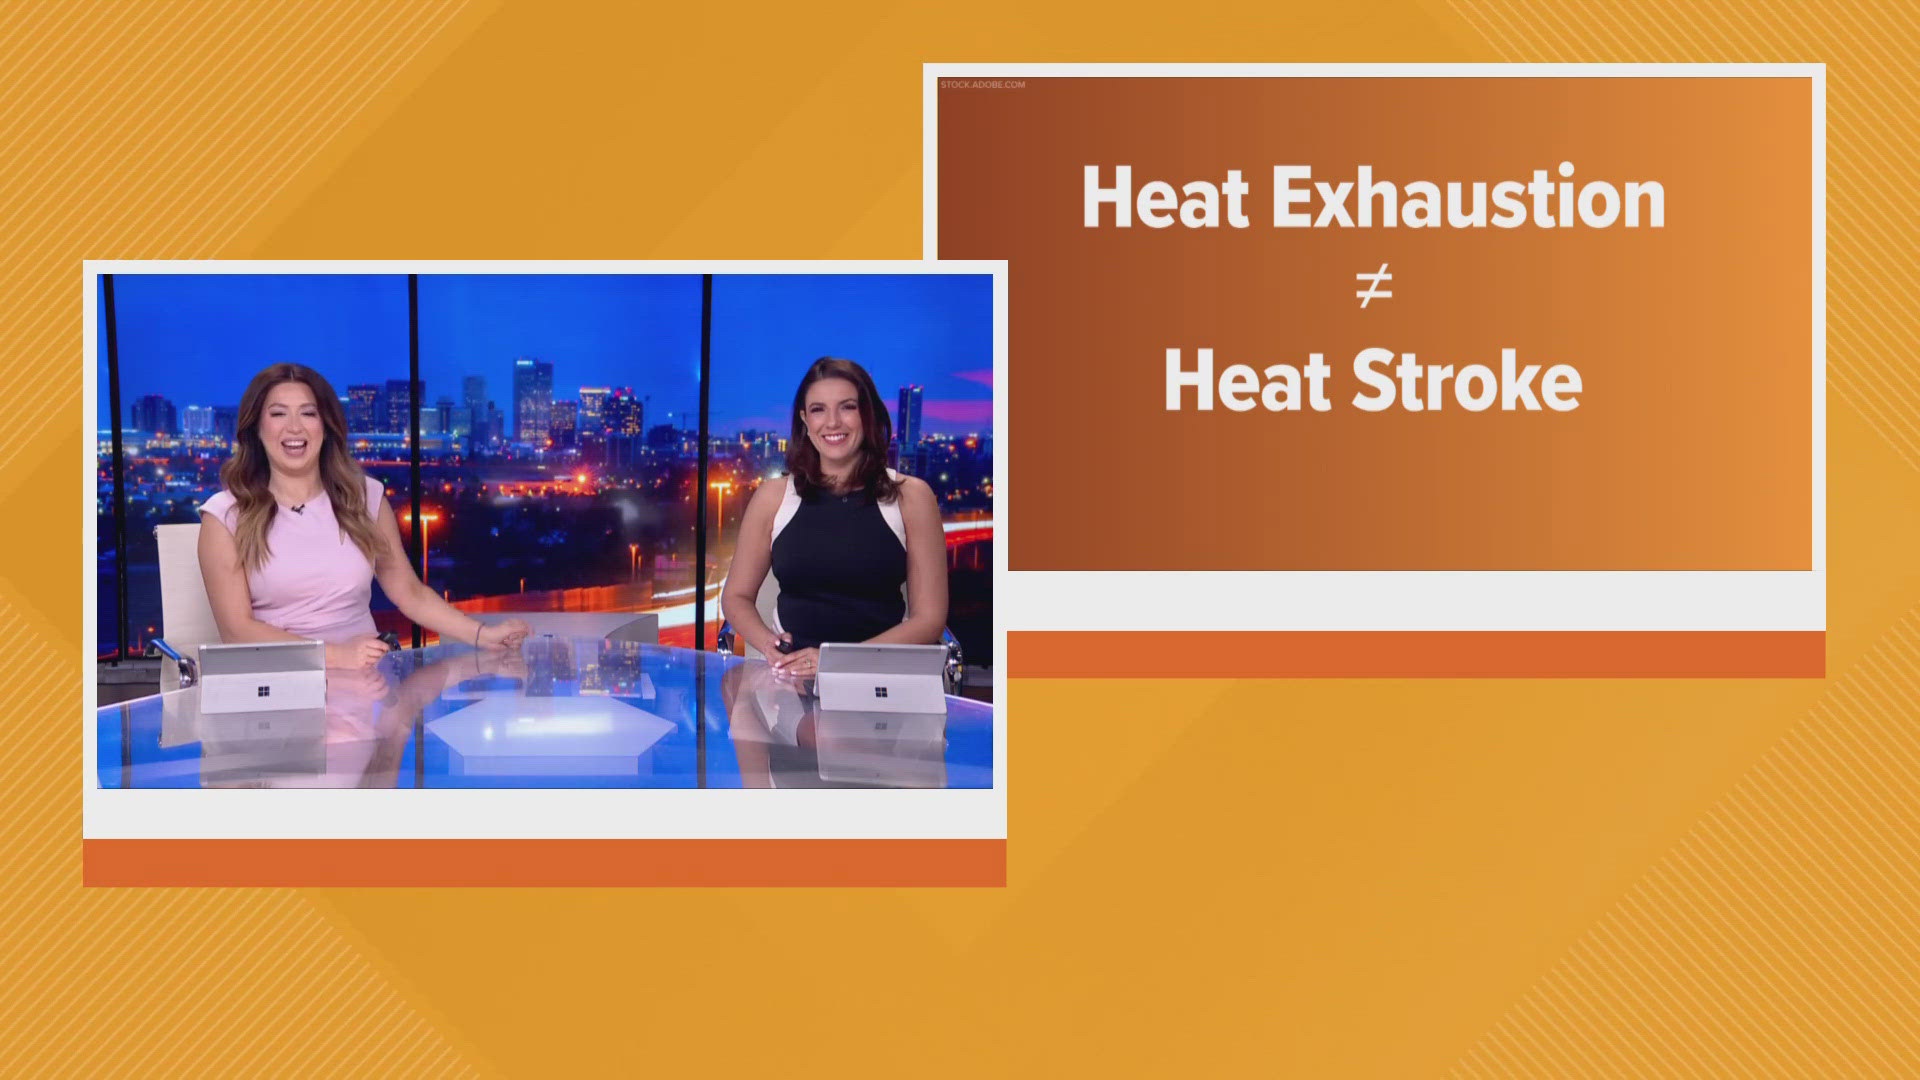 If you're outside for an extended period, it's important for you to be able to spot the signs of heat exhaustion and heat stroke.